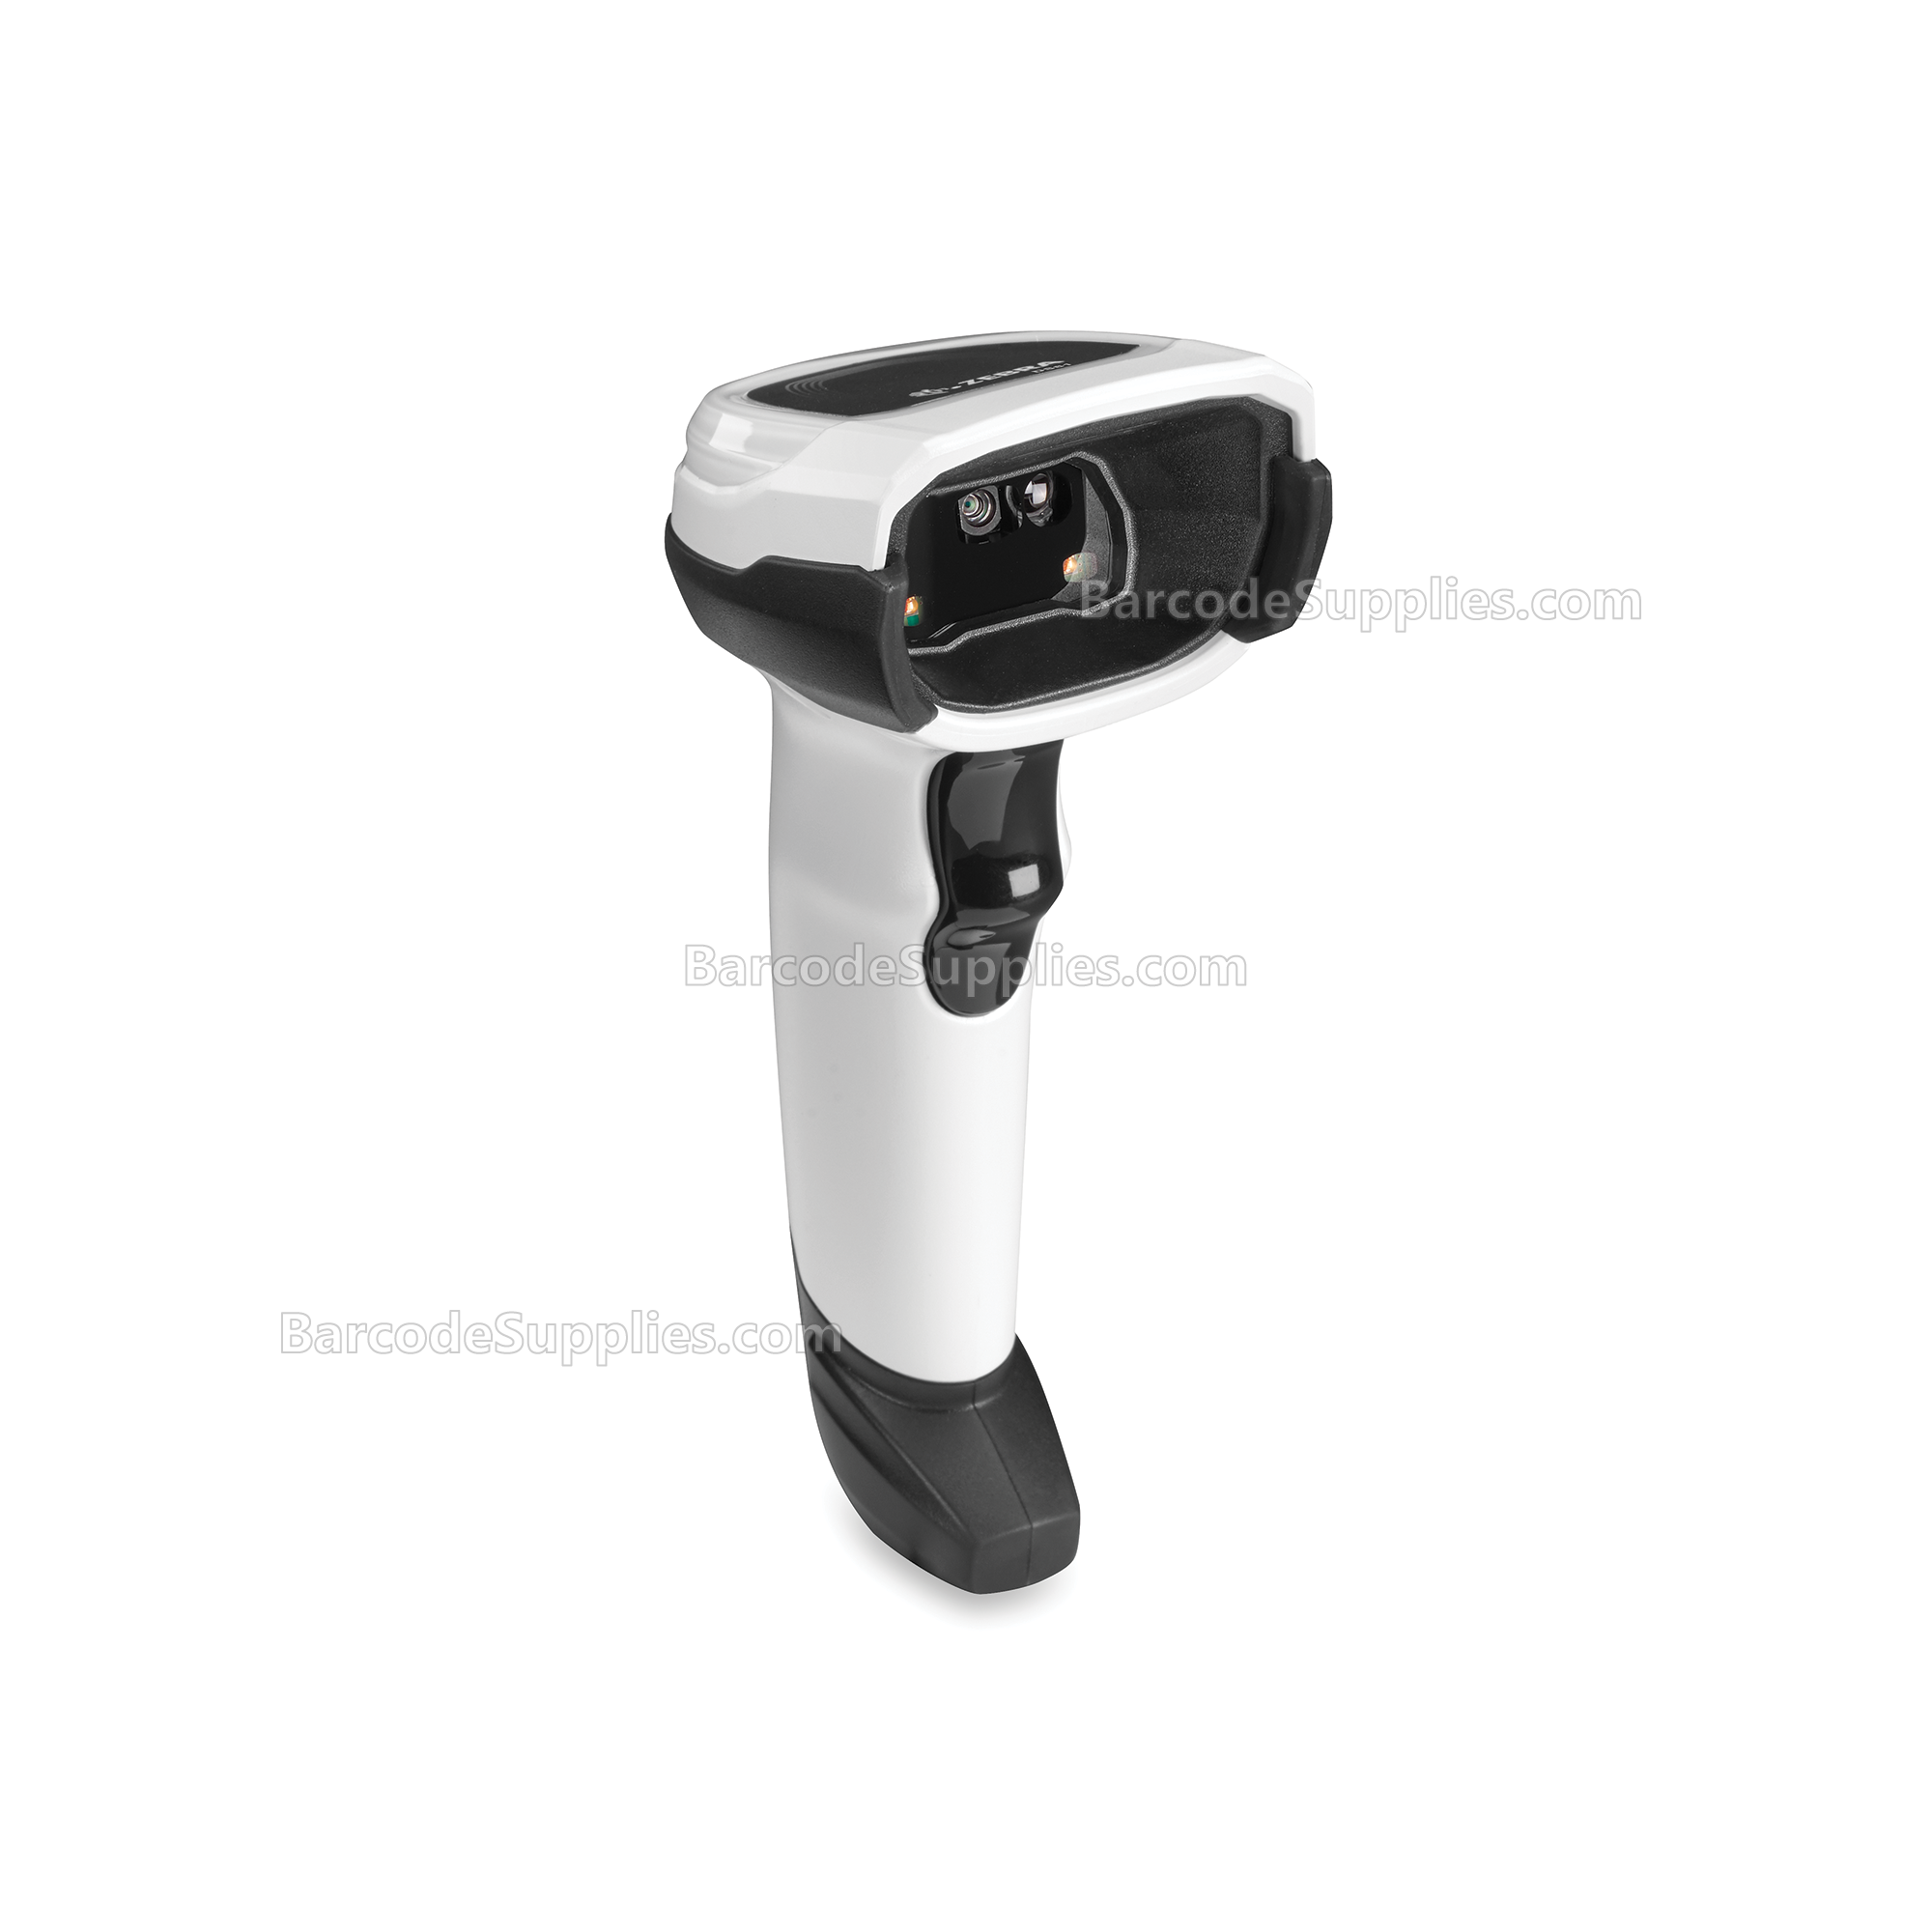 DS8108-SR White (with Stand) (Cable Not Included) KIT: DS8108-SR00006ZZWW Scanner, 20-71043-04R Stand